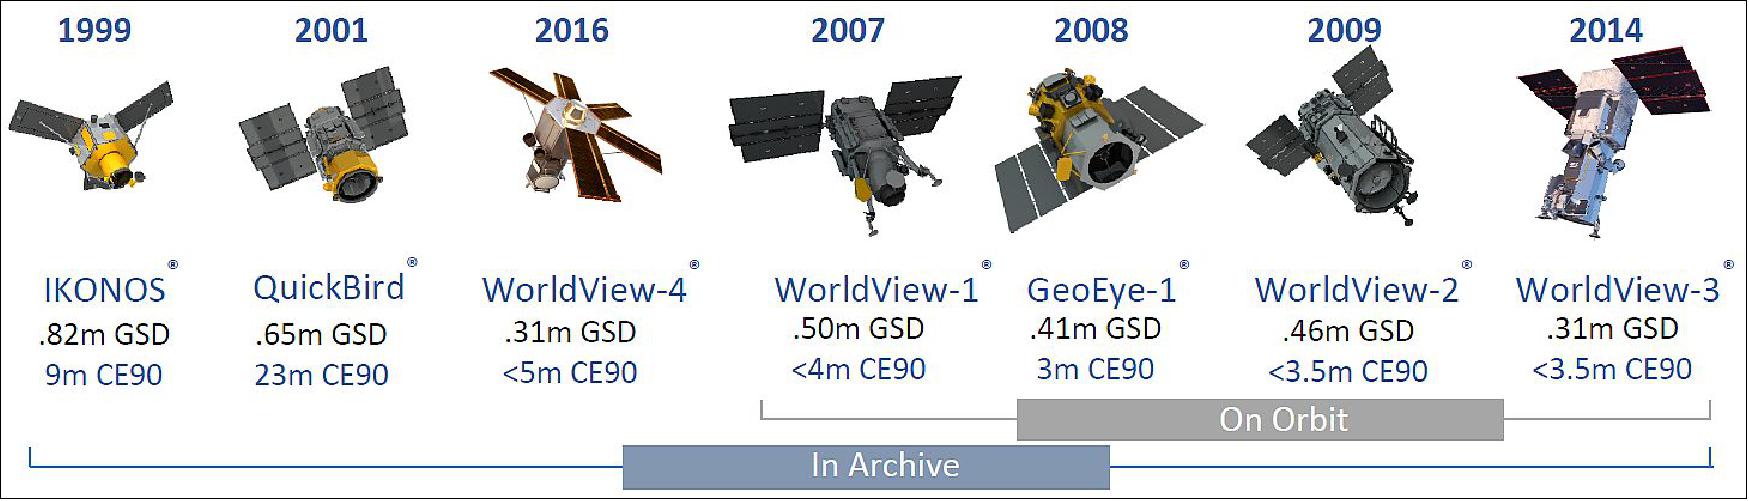 Figure 2: Maxar operates the industry’s highest resolution commercial remote sensing satellite constellation, and has been doing so since 1999 (image credit: Maxar)